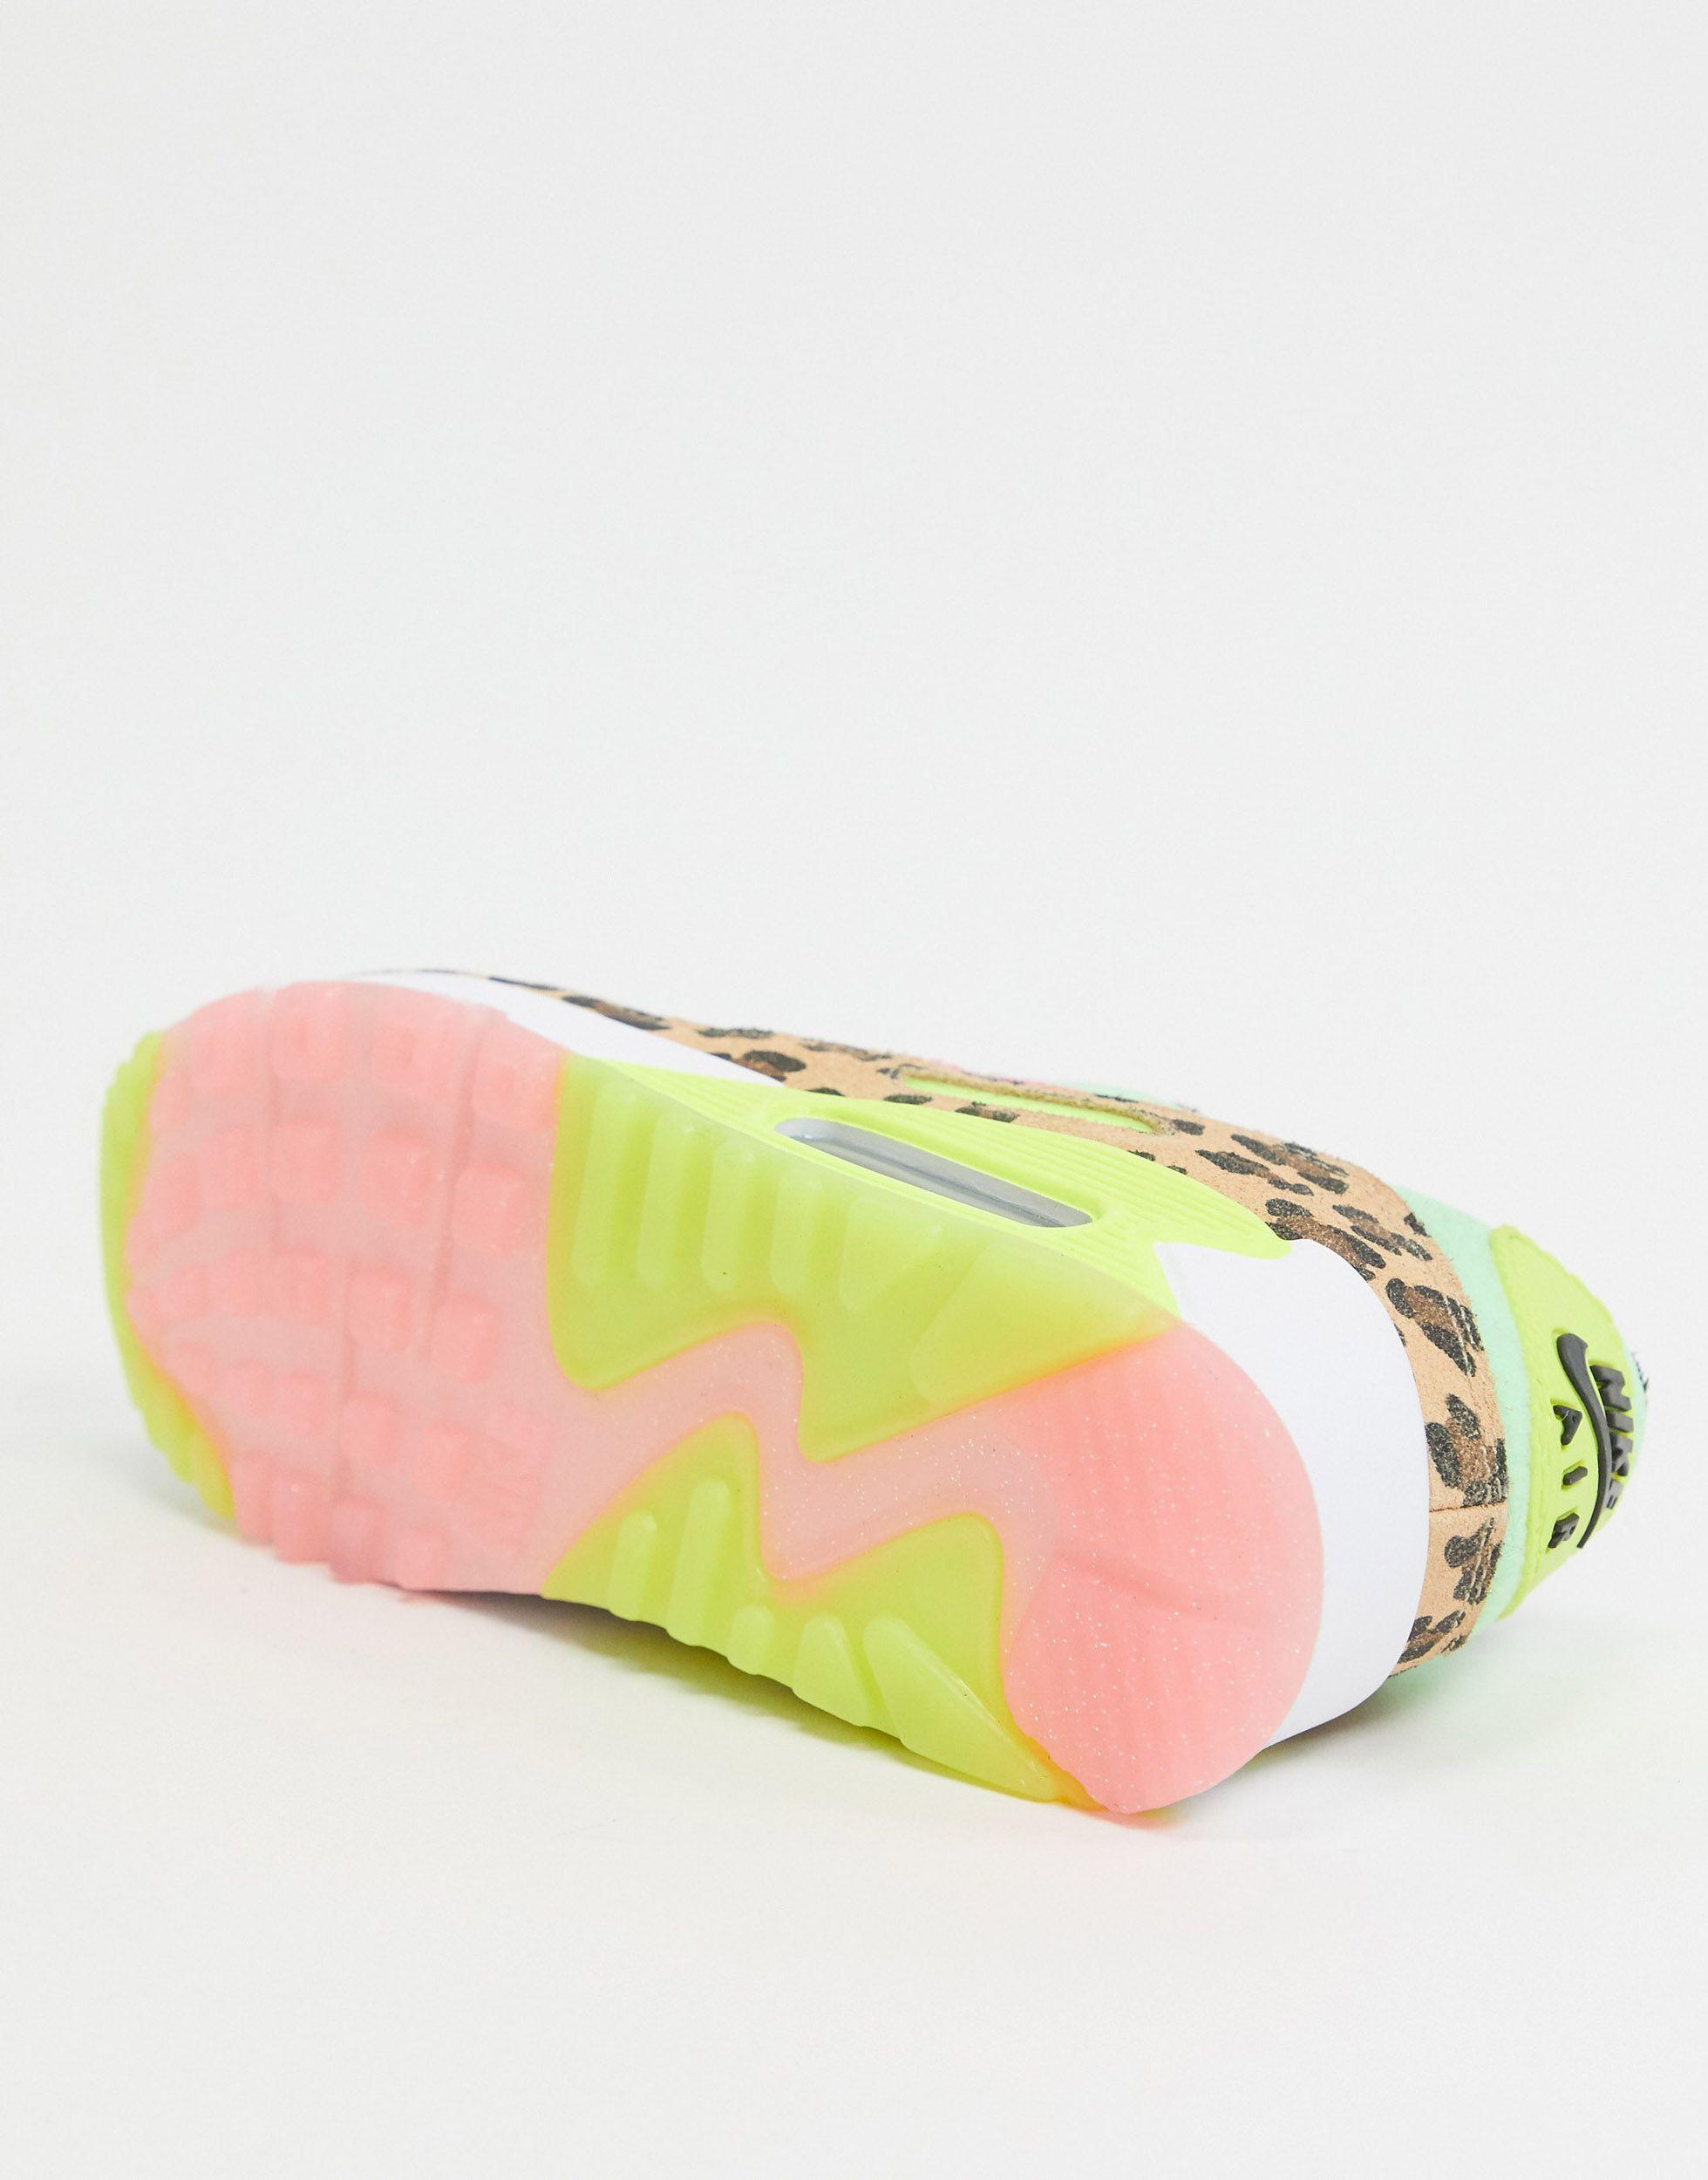 Air Max 90 Neon Trainers | Lyst